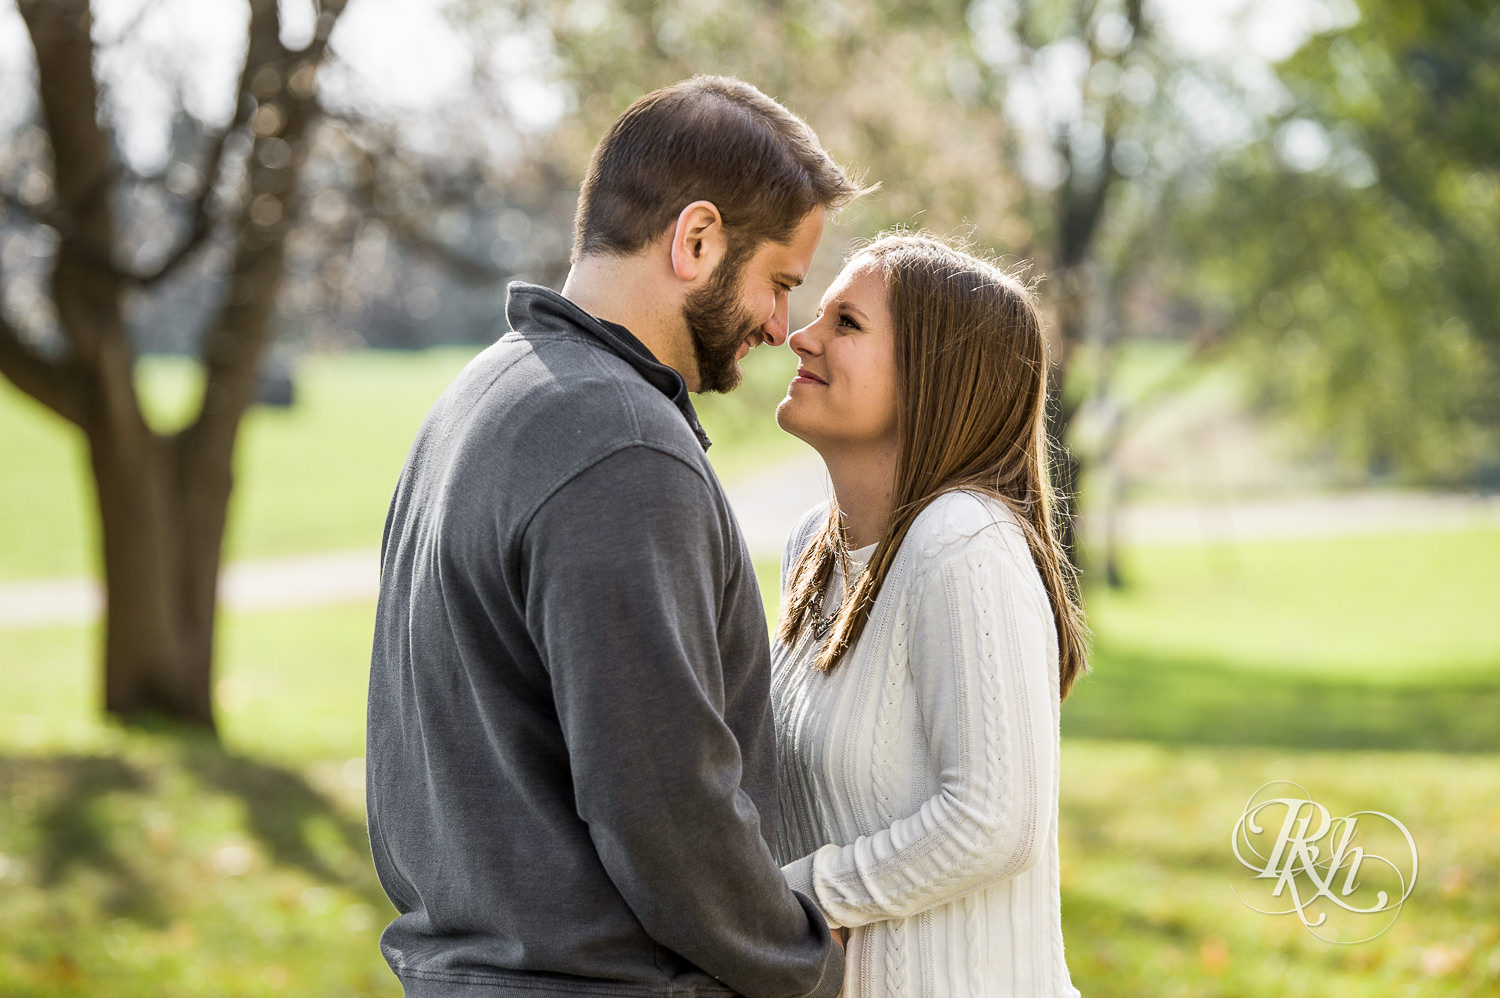 Man and woman smile during engagement photography session at home in Annandale, Minnesota.